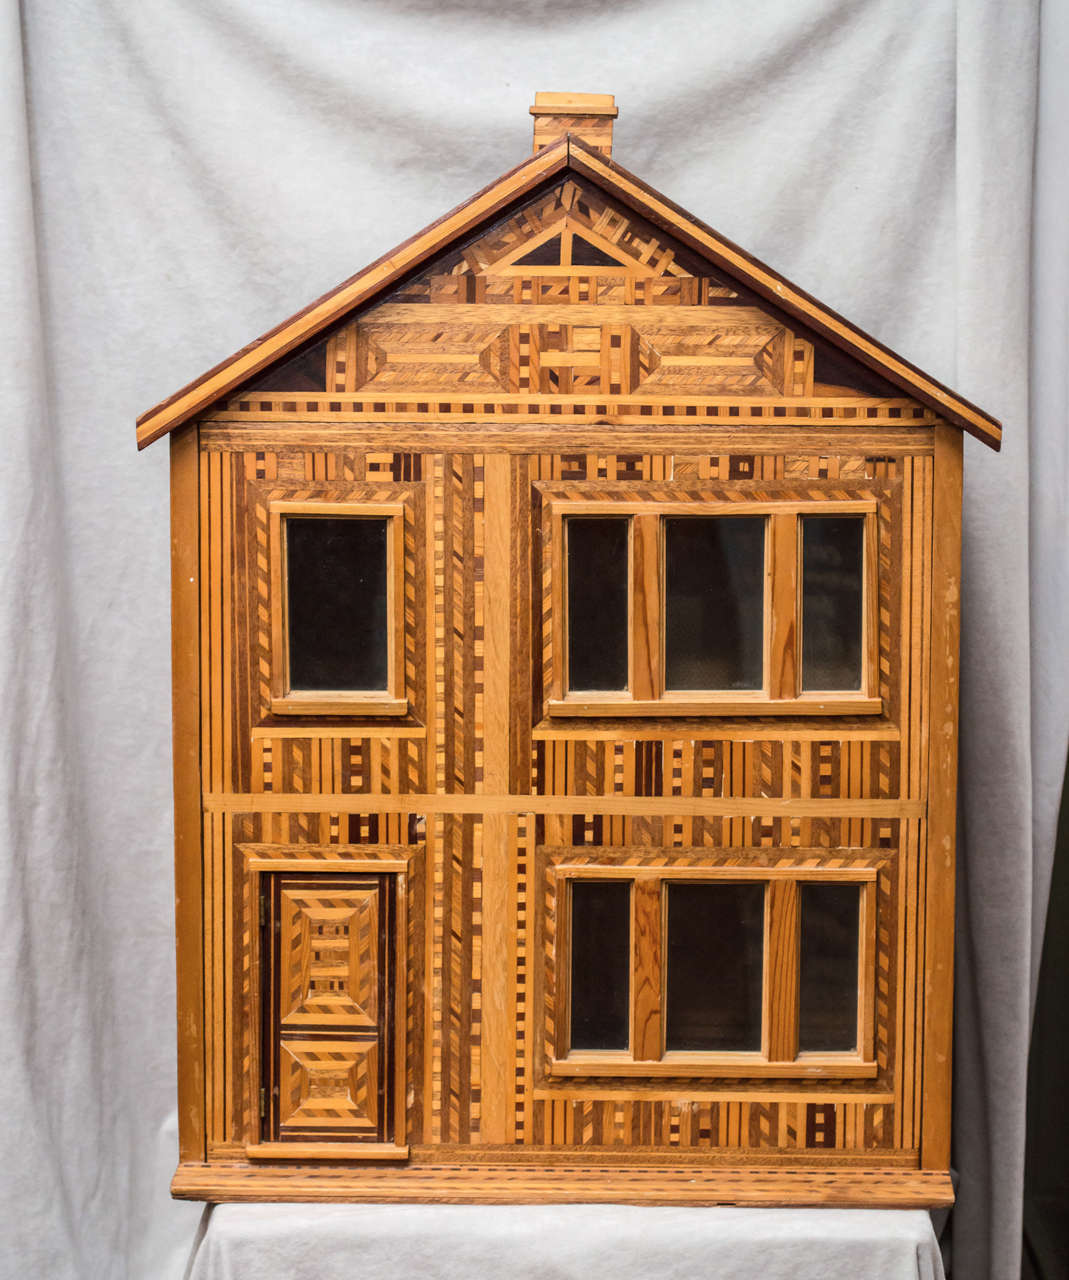 This very unusual doll house took someone a very long time to create. Loaded with marquetry and done in a very eye catching design. A unique and interesting antique.